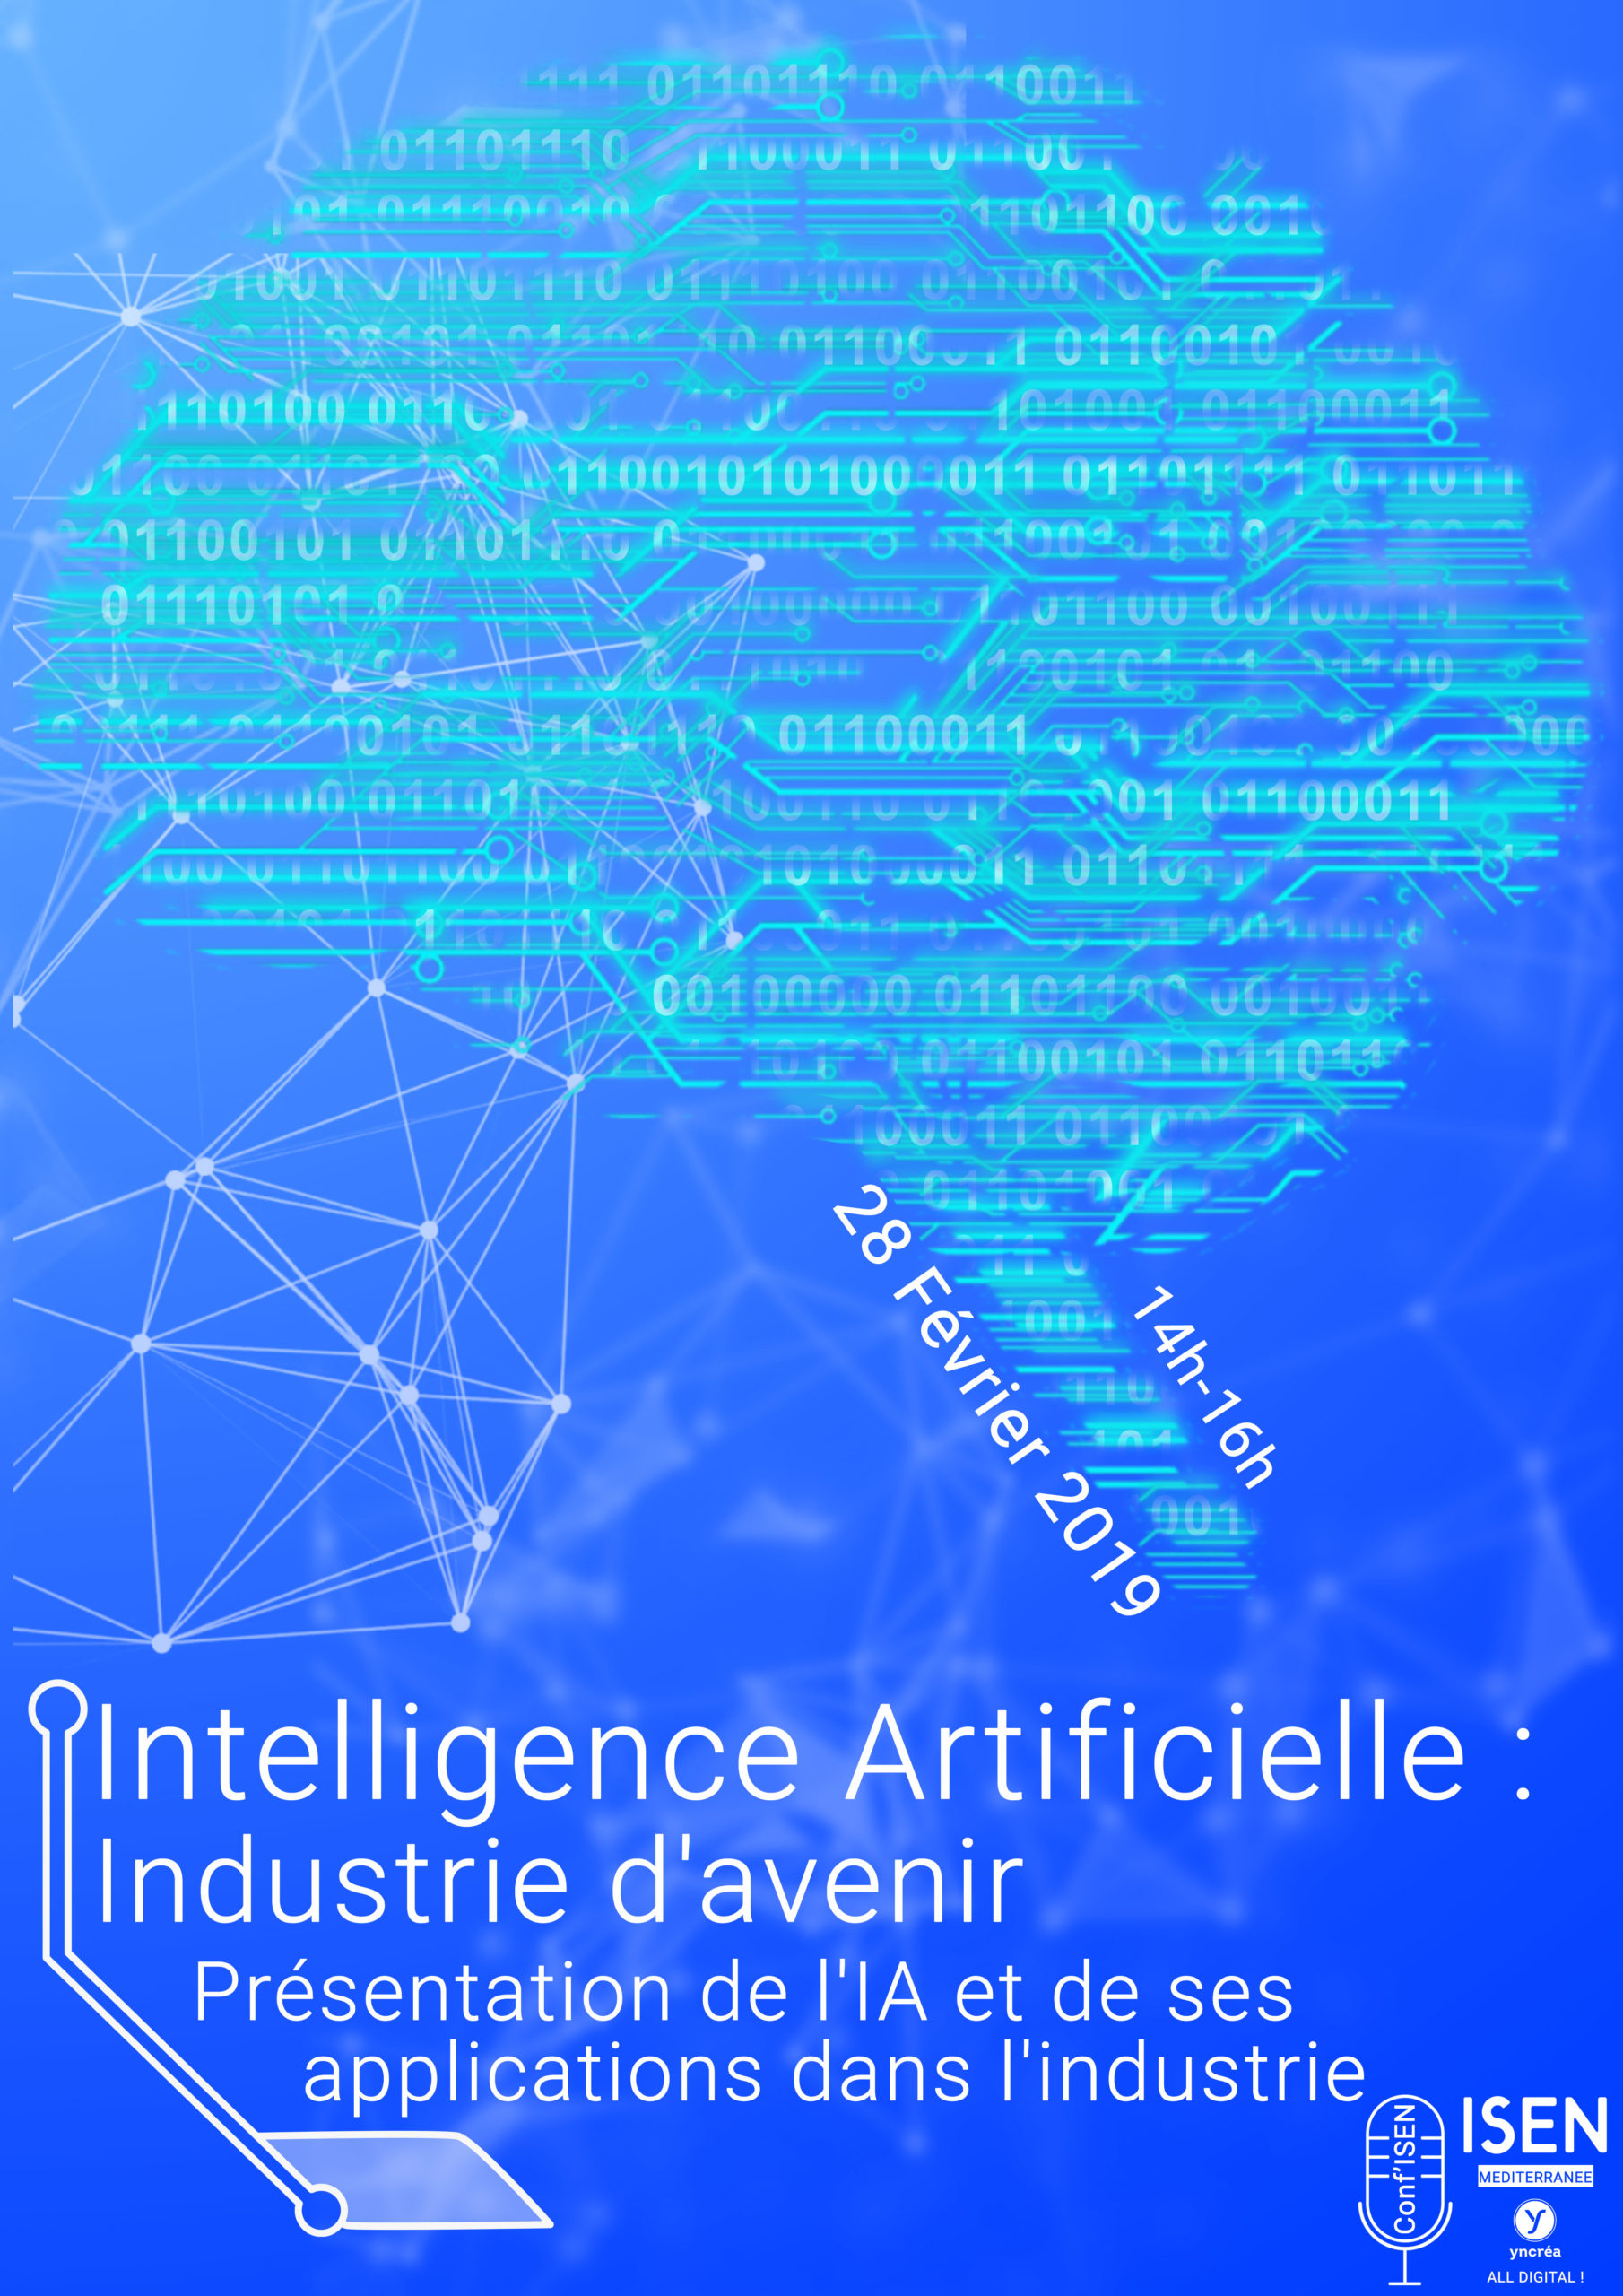 Artificial Intelligence Conference Poster – Oussama AMEUR